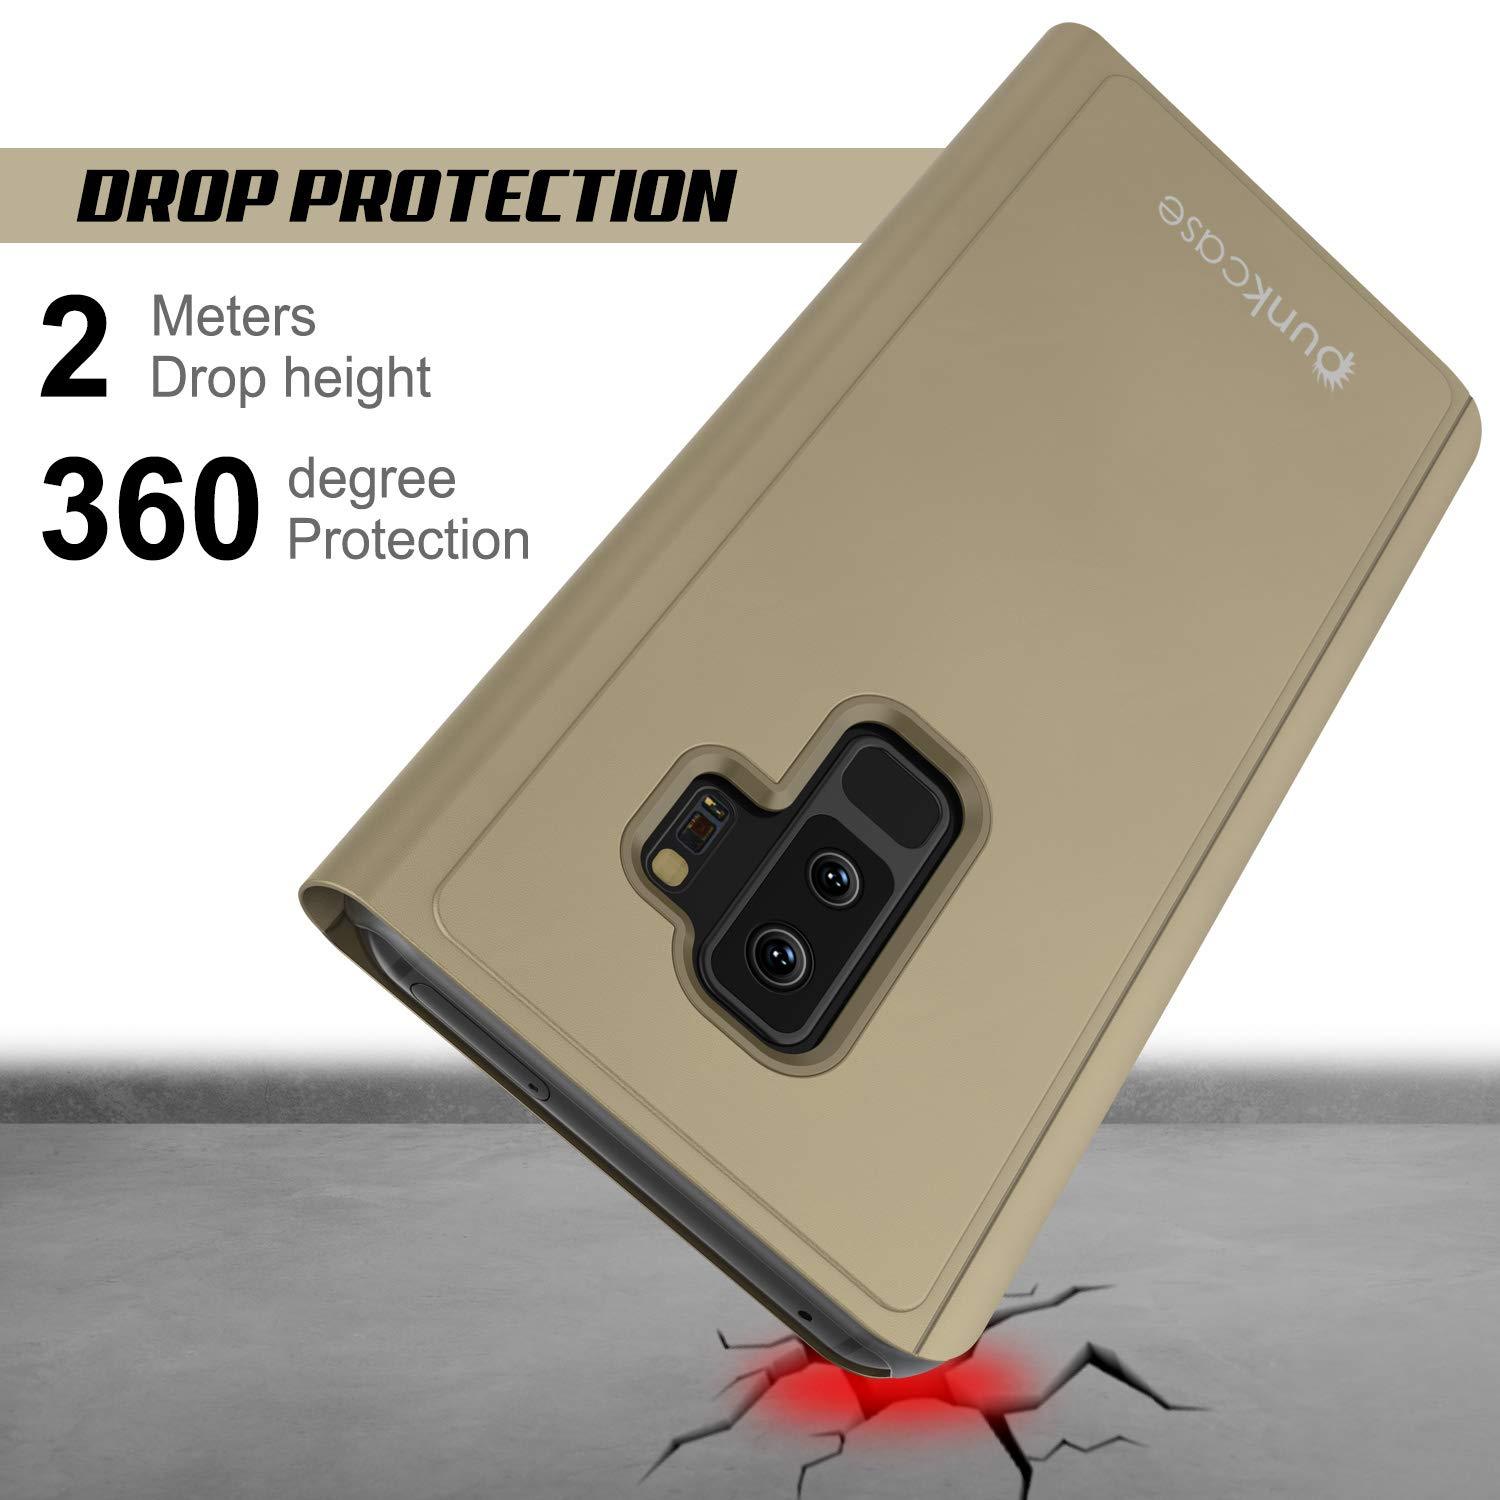 Punkcase S9 Plus Reflector Case Protective Flip Cover [Gold]